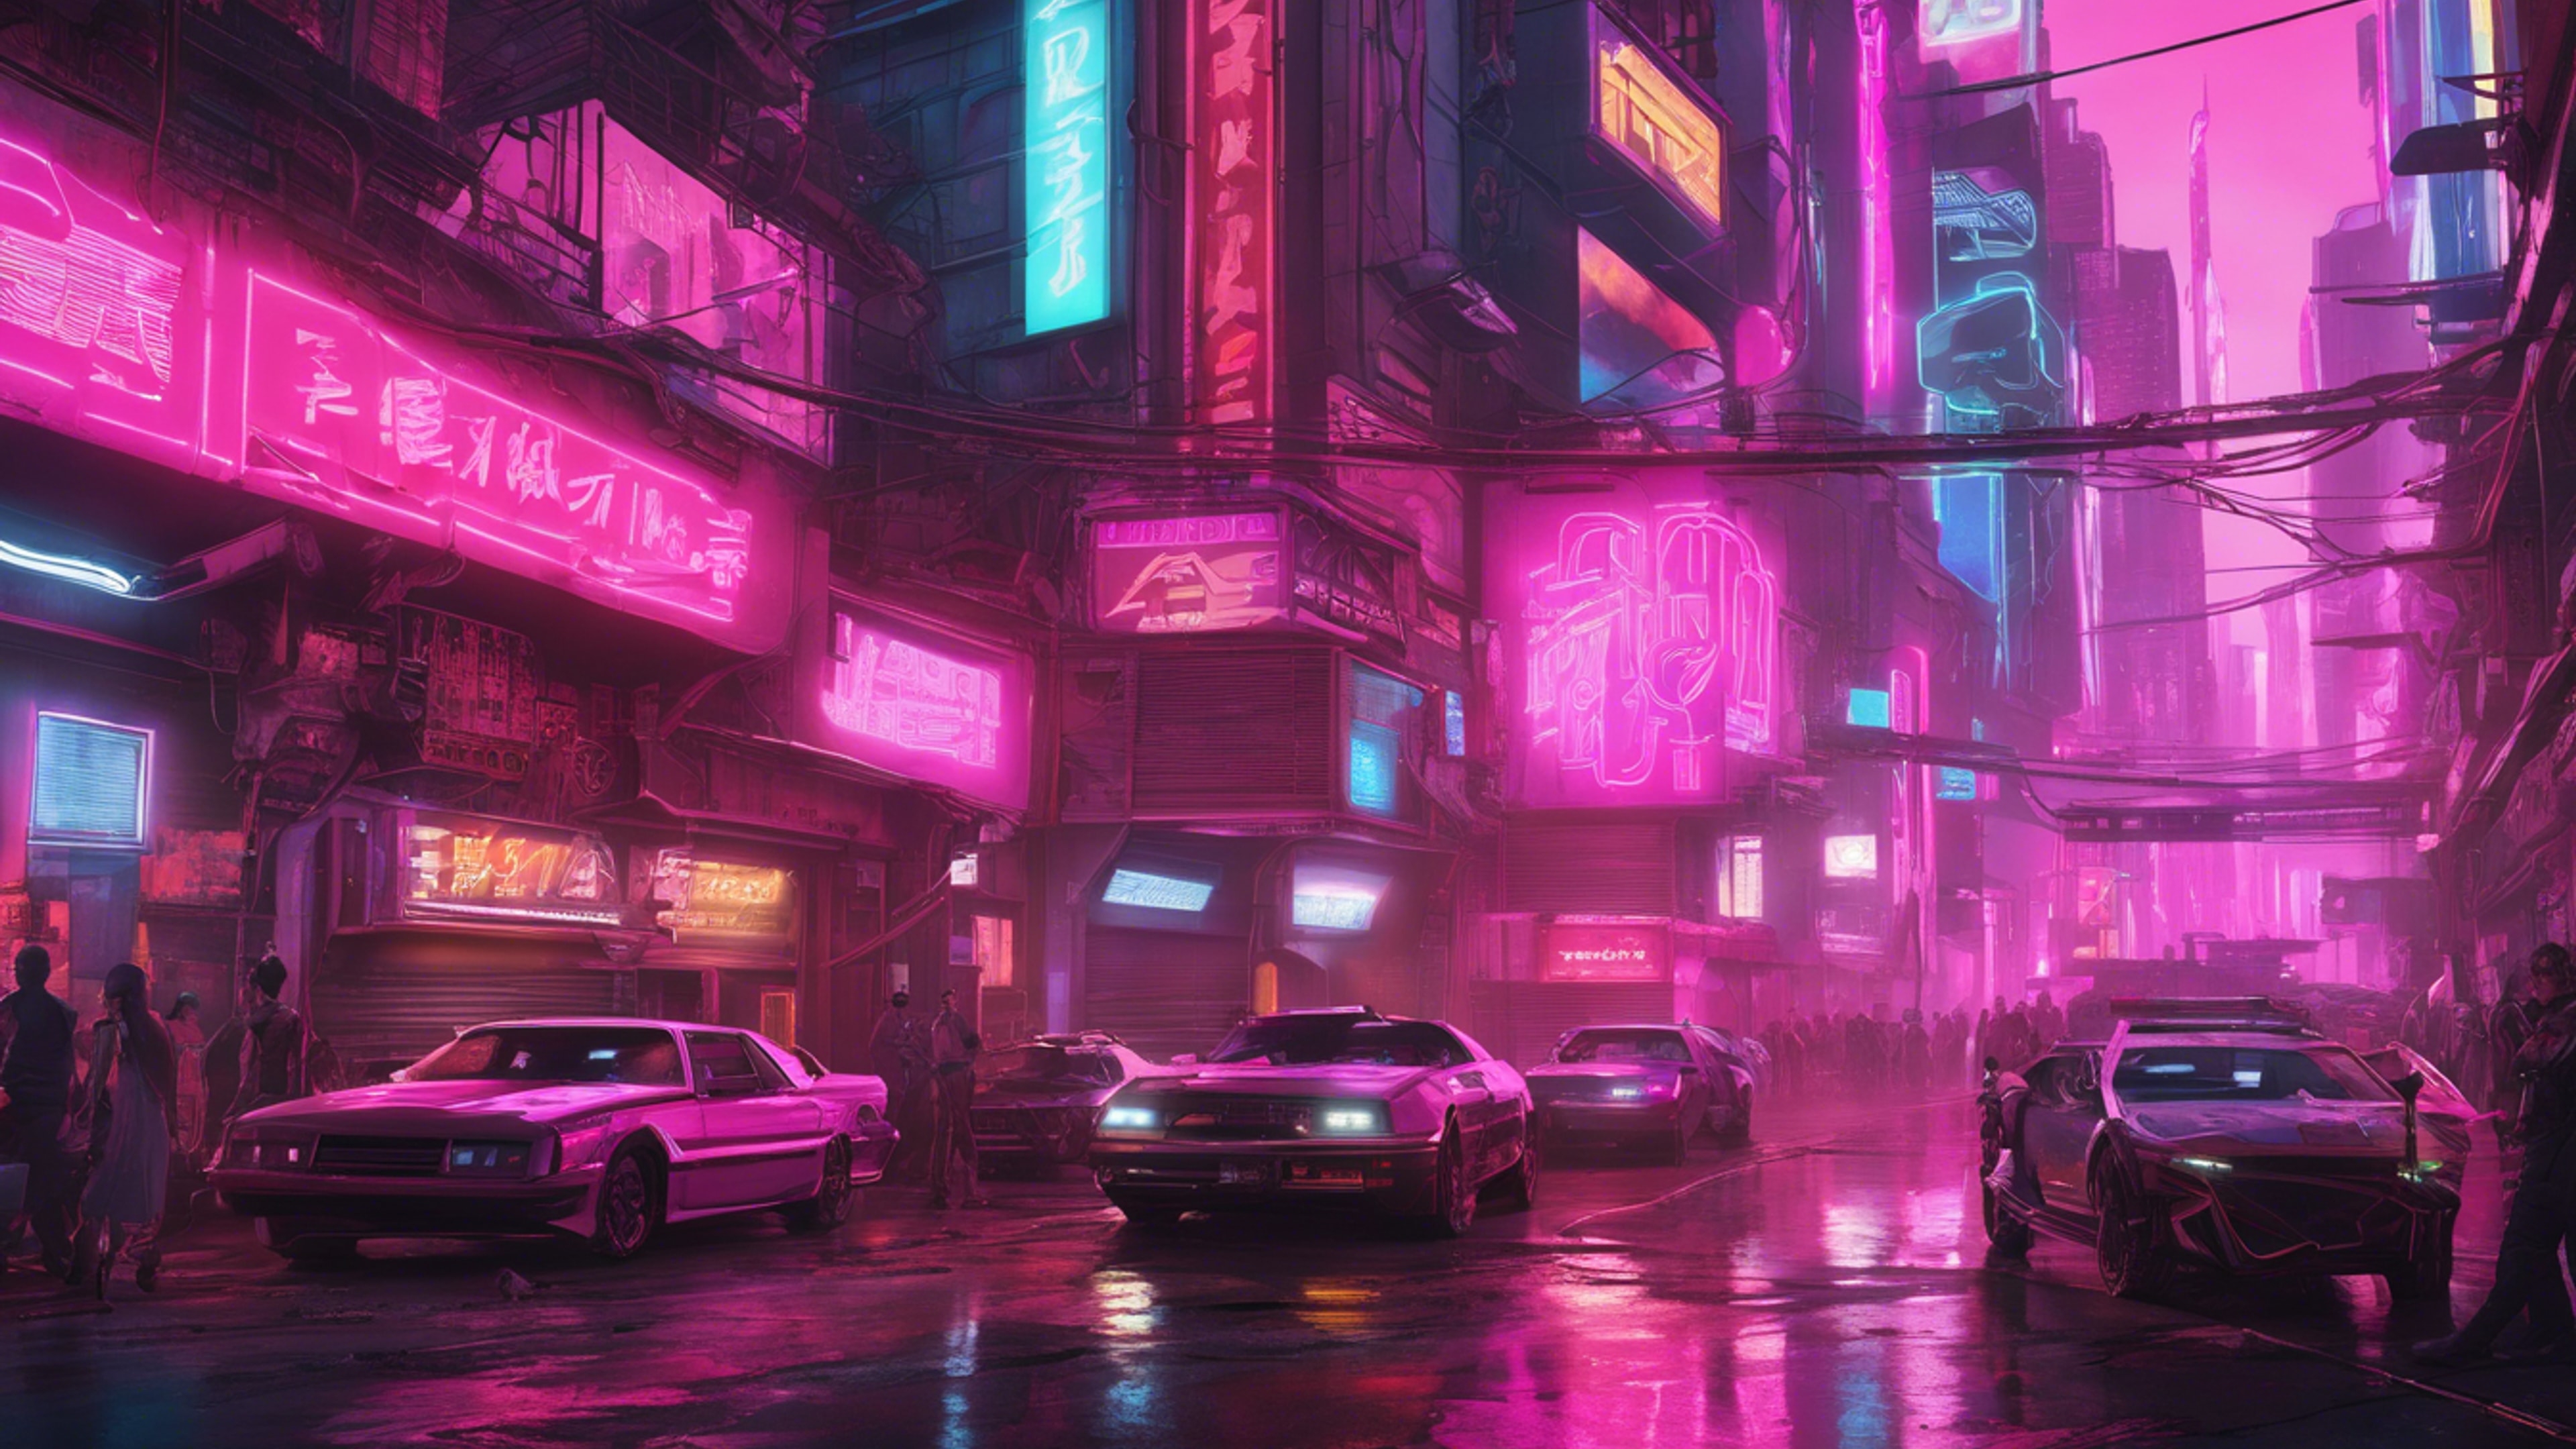 A wide-angle view of a bustling city street in the future, dominated by pink neon signs. Wallpaper[5759e15553a14a8aa13a]